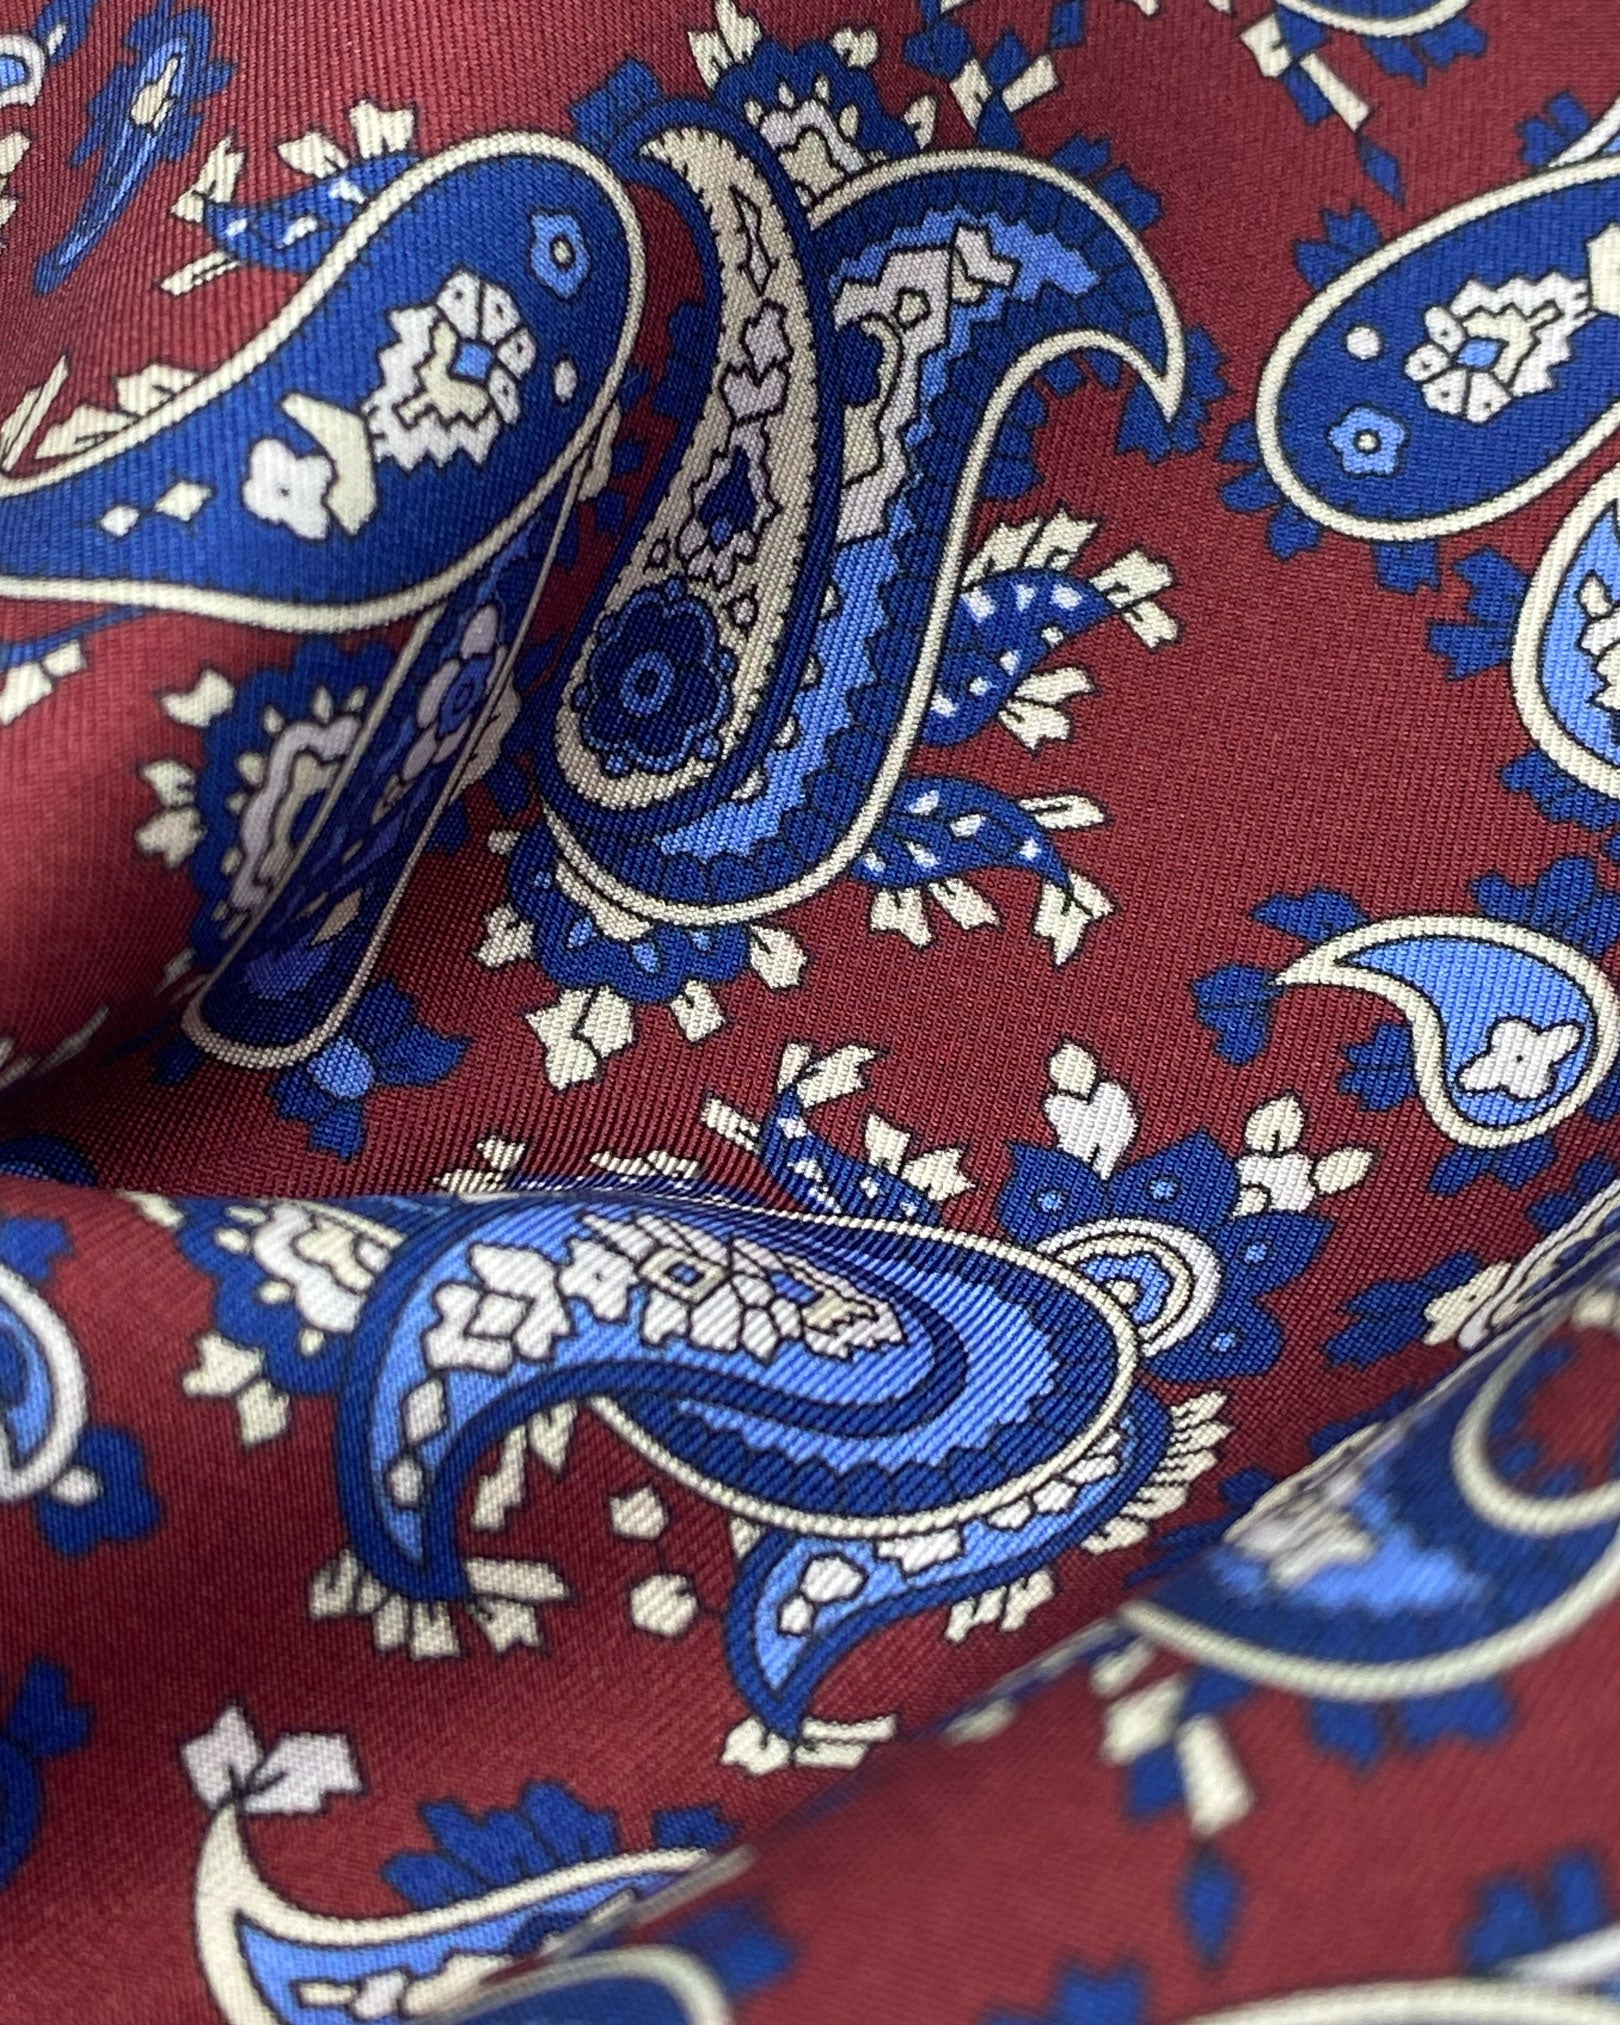 A ruffled close-up of the burgundy and blue patterned 100 percent silk scarf, presenting a closer view of the royal-blue and cream paisley patterns.